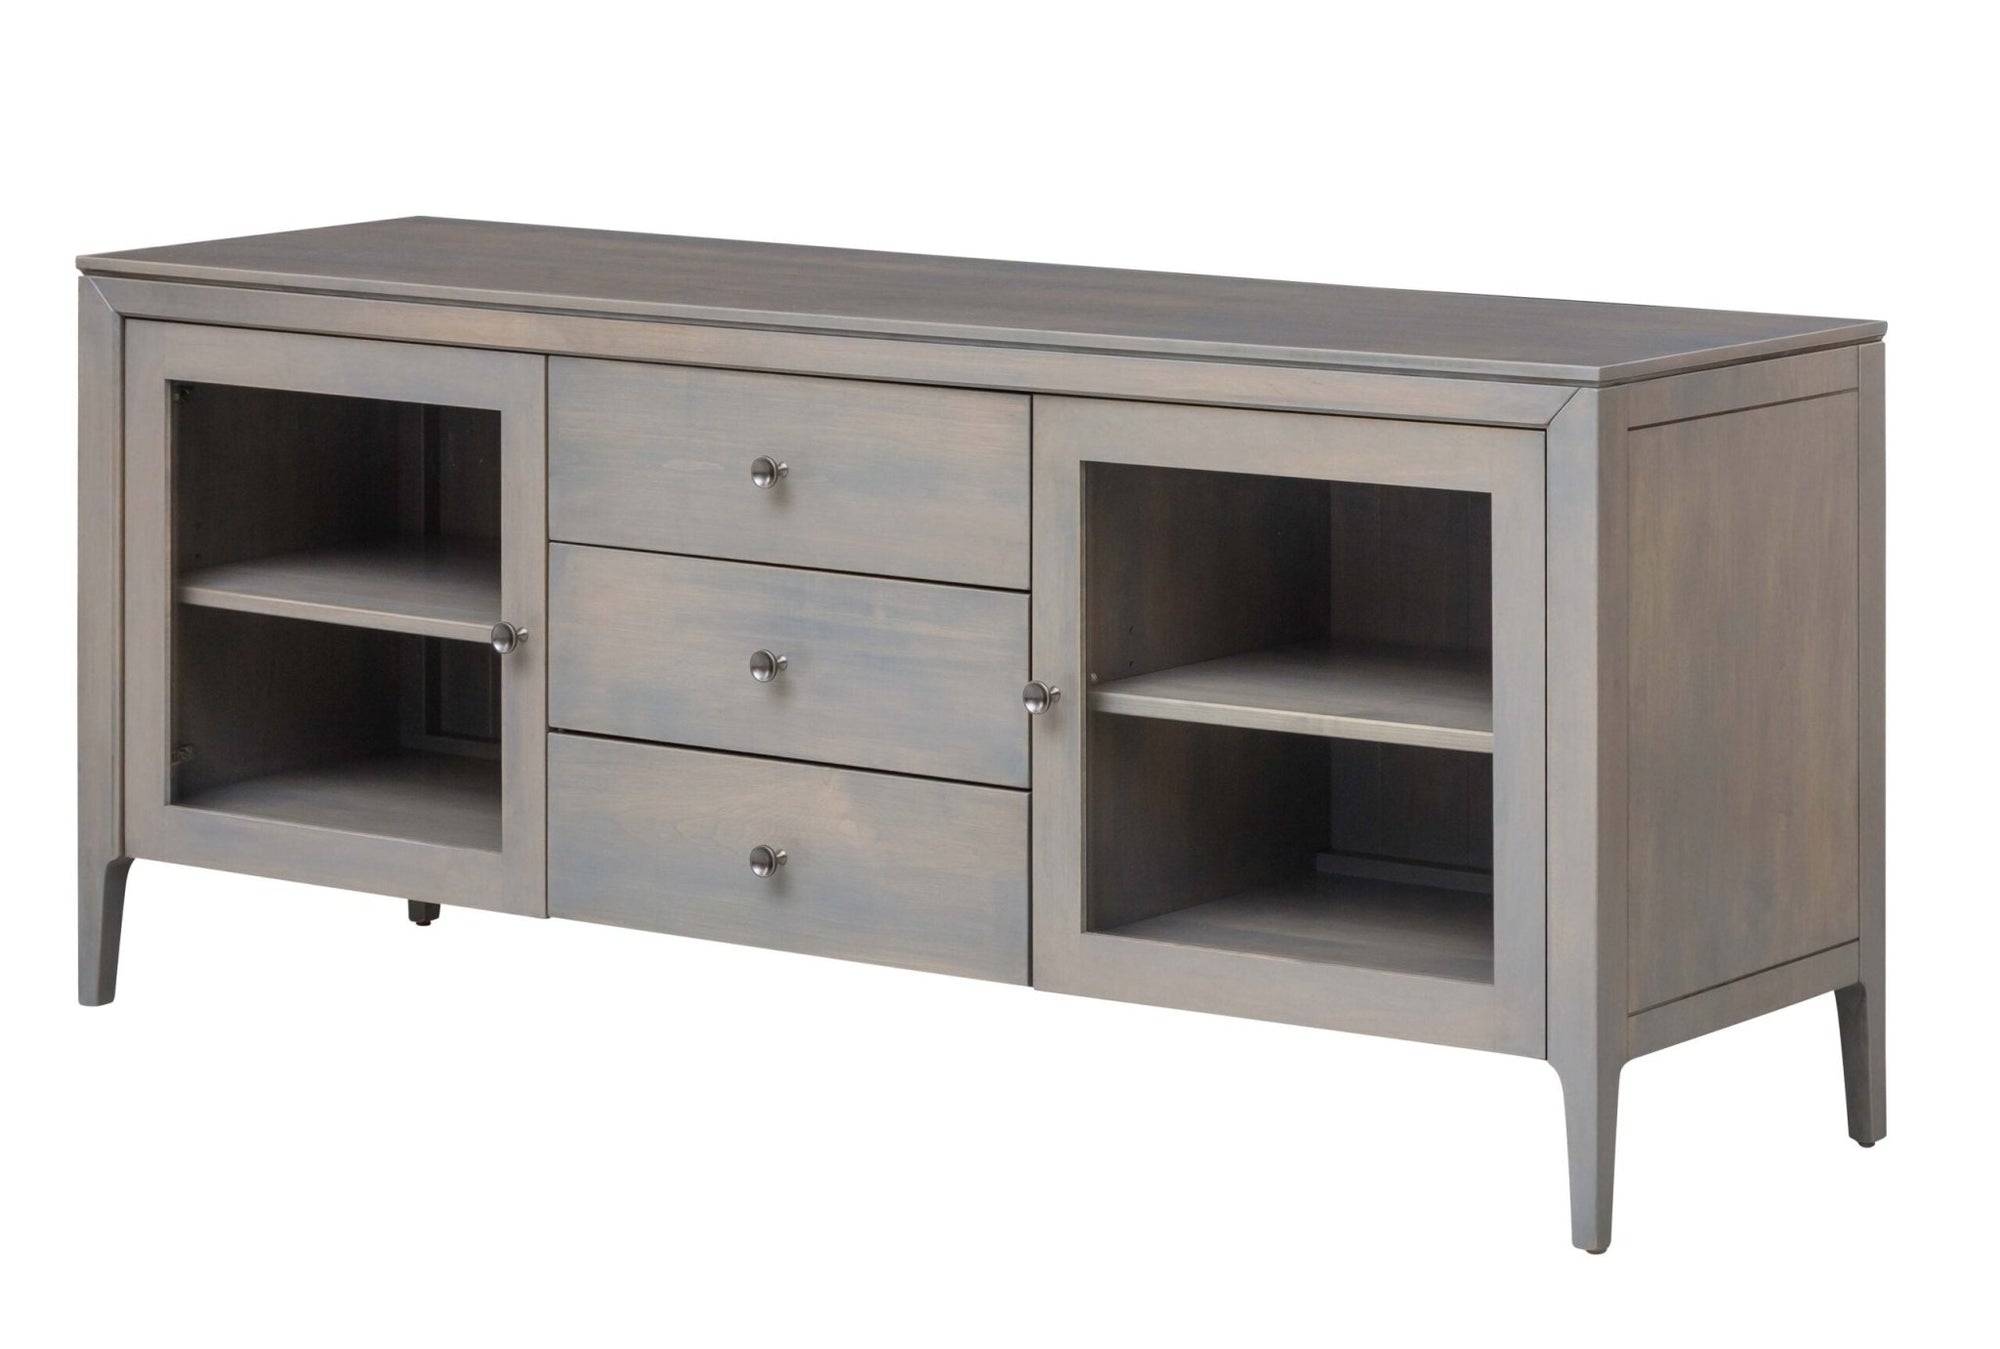 Hyde Park Low Cabinet - snyders.furniture